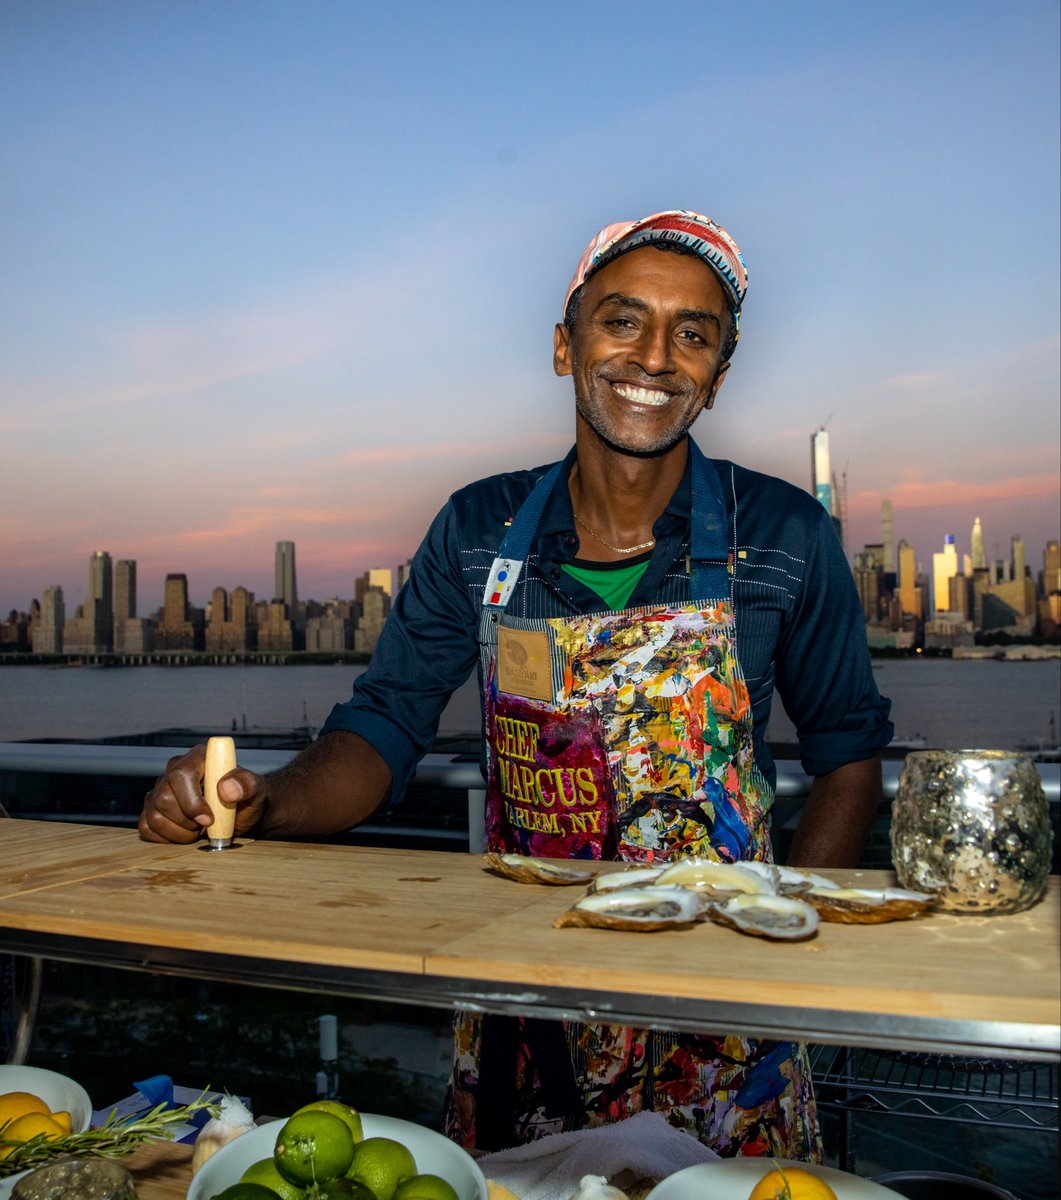 Fresh oysters and that iconic city skyline... Can't think of a better way to spend an evening.